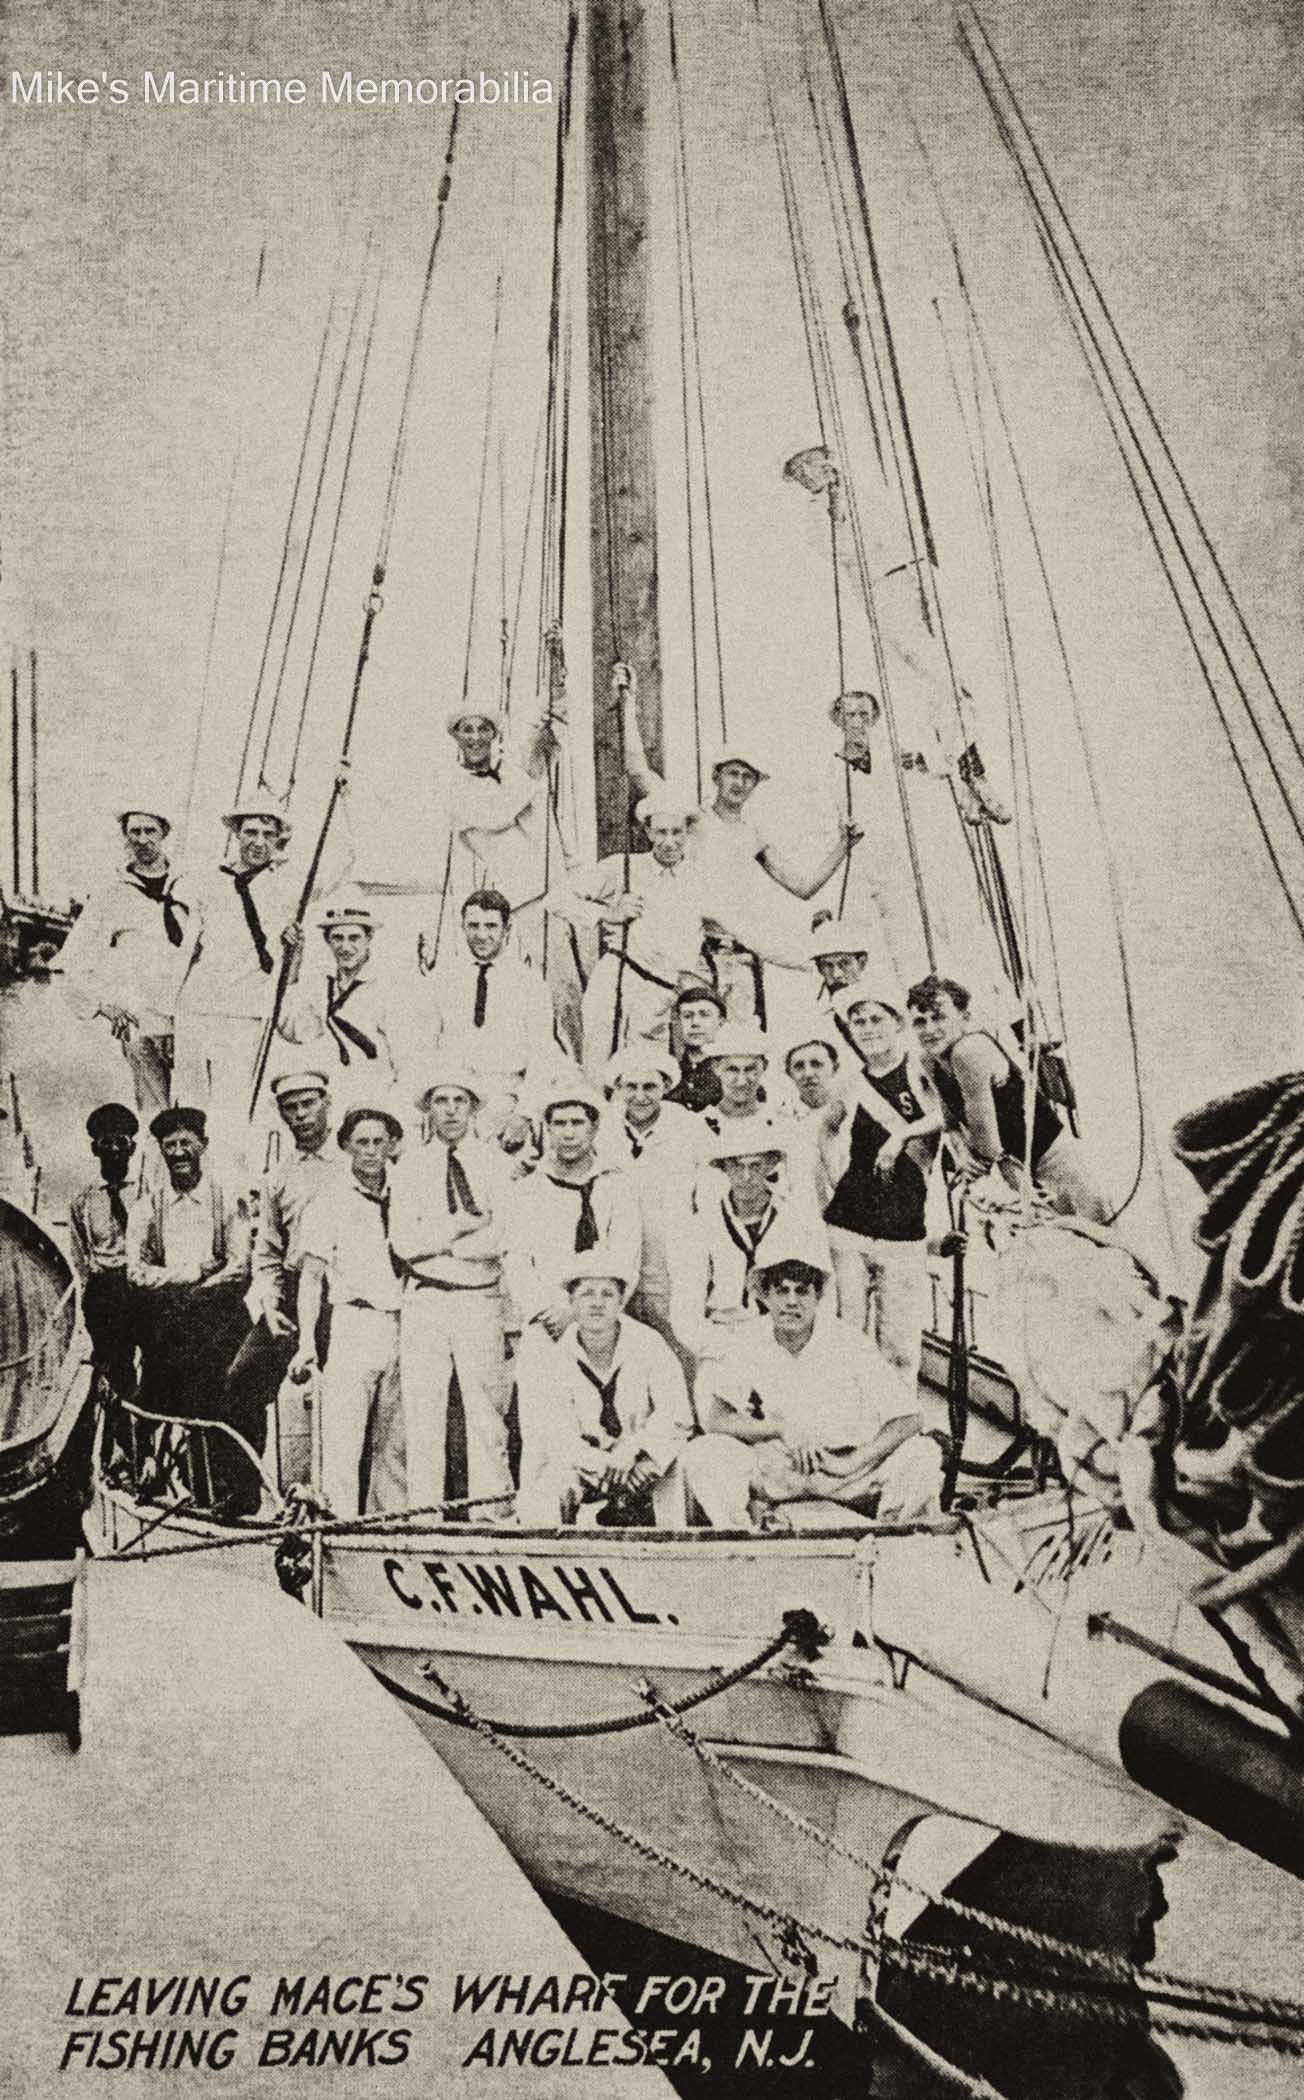 C.F. WAHL, Anglesea, NJ – 1905 "Leaving Mace's Wharf for the Fishing Banks". A large group of what appears to be cadets crowd the "C. F. WAHL" as she prepares to depart for a day of fishing in 1905. This sailing sloop was built in 1888 at Atlantic City, NJ and was one of nearly a hundred party fishing boats sailing from southern New Jersey at the time.